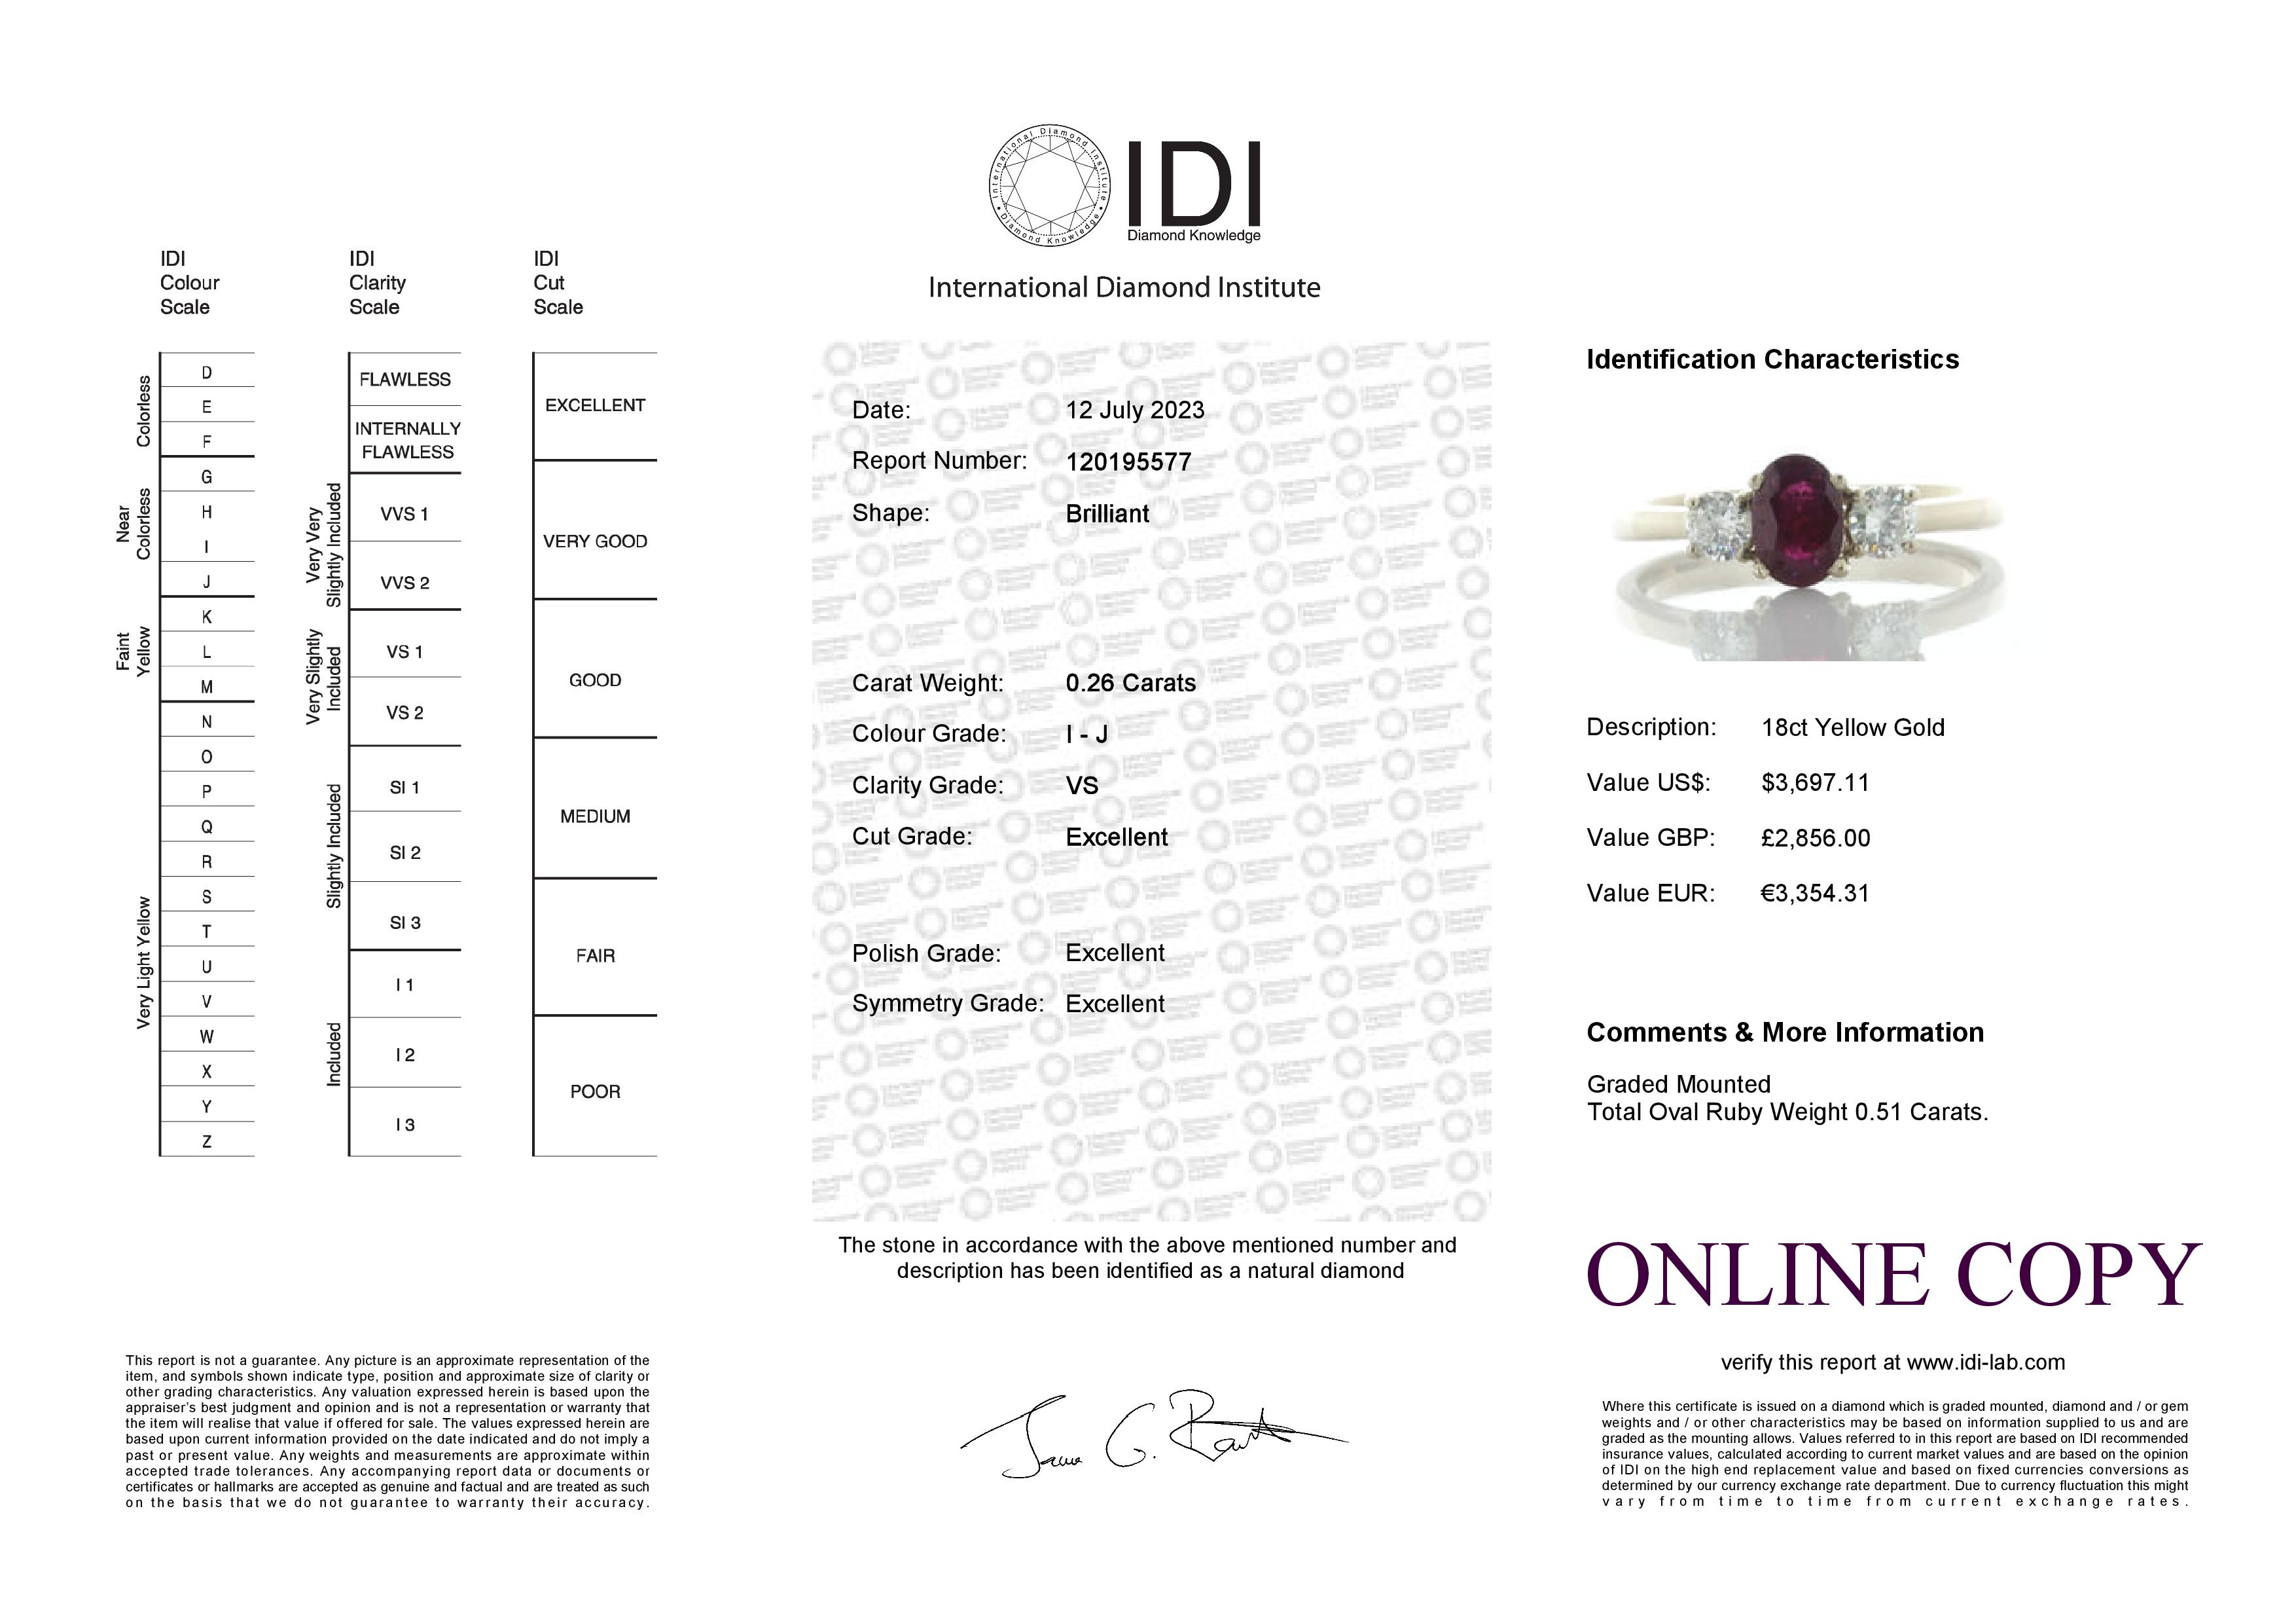 18ct Yellow Gold Three Stone Oval Cut Diamond and Ruby Ring (R0.51) 0.26 Carats - Image 6 of 6